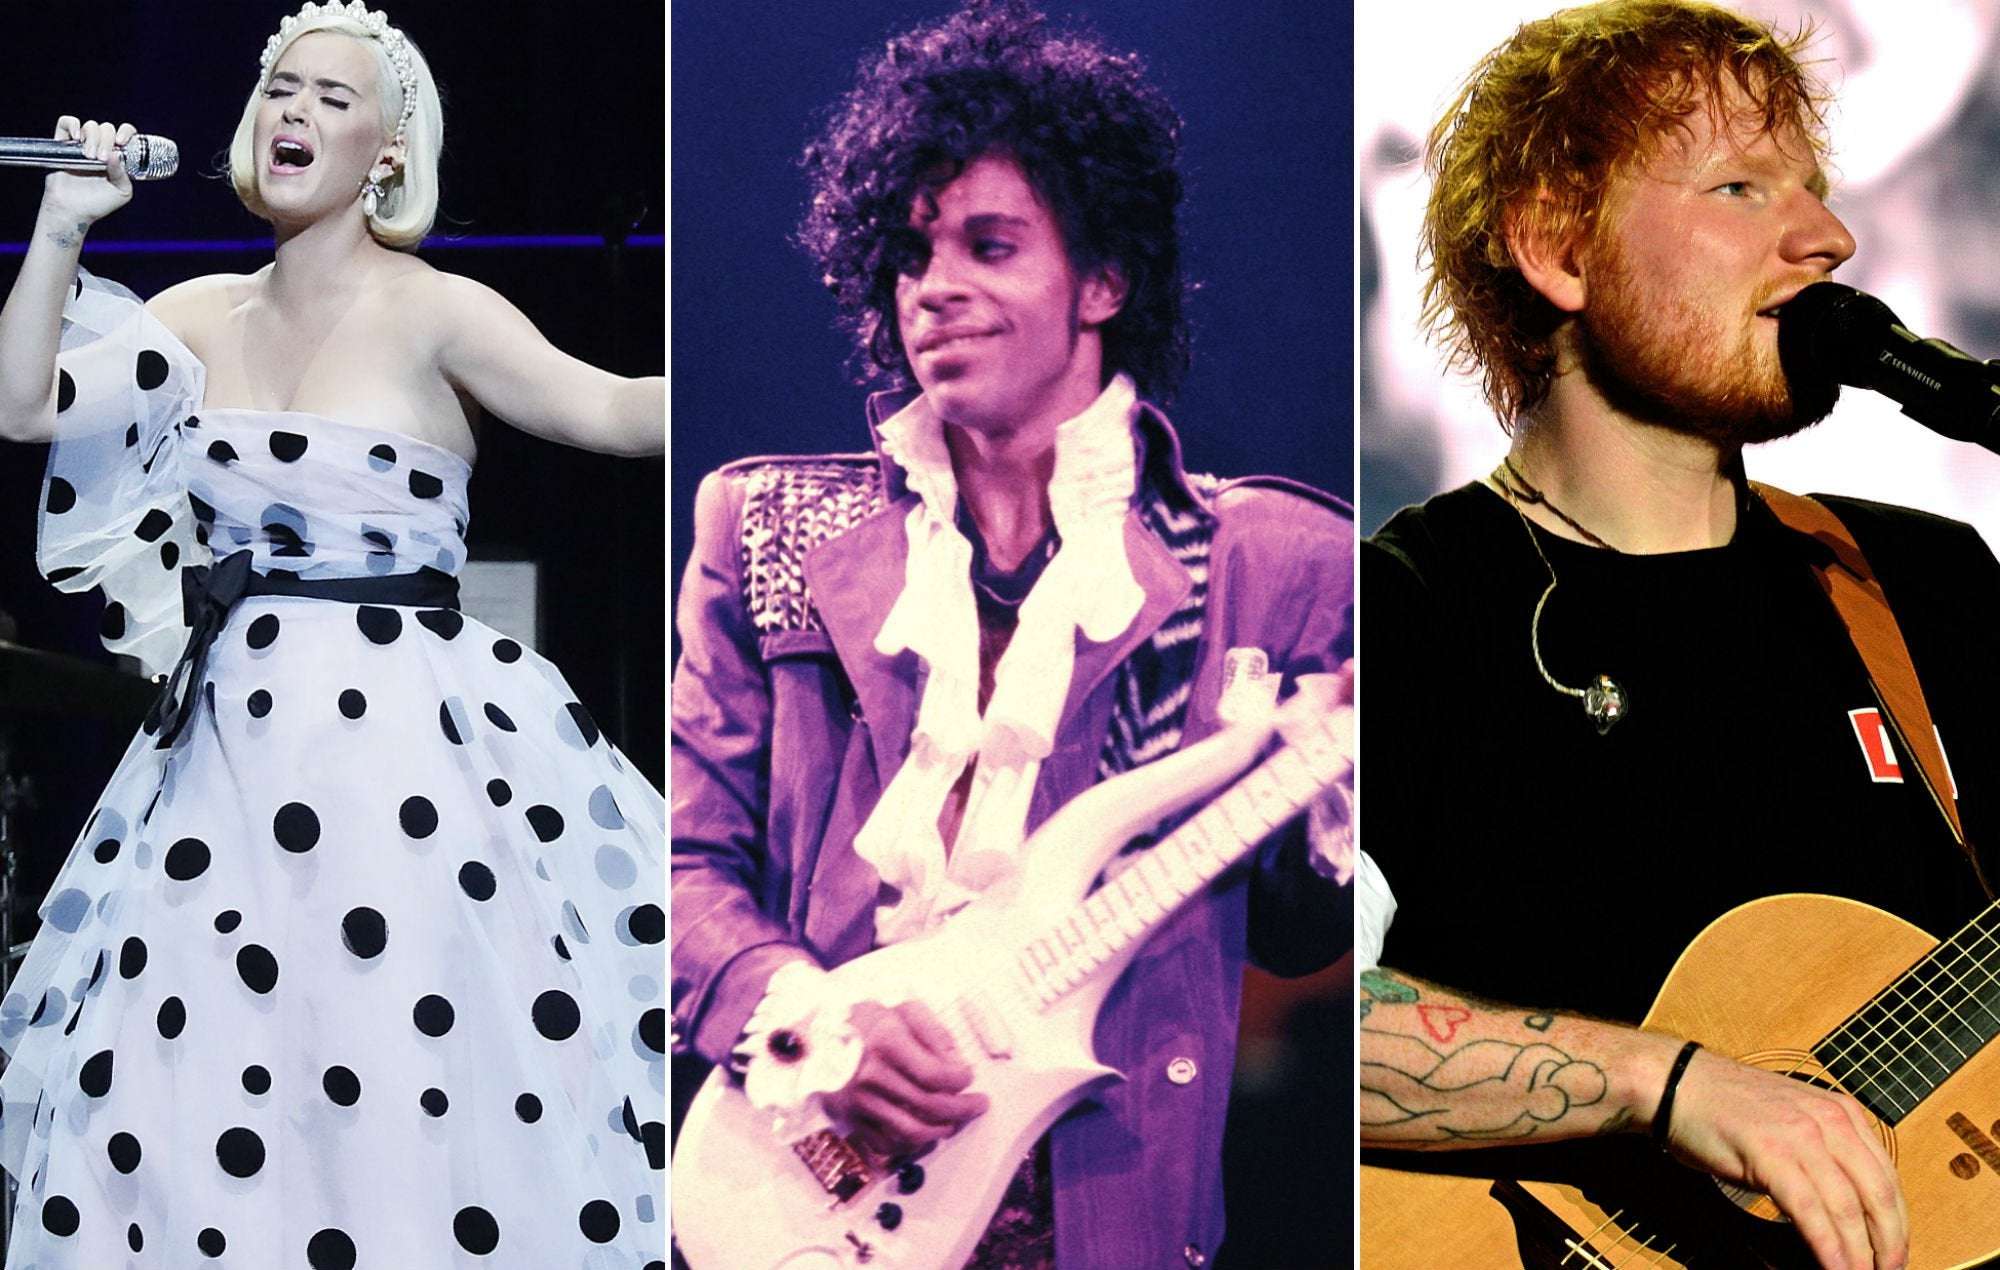 image for Prince accused music industry of “ramming” Katy Perry and Ed Sheeran “down our throats”